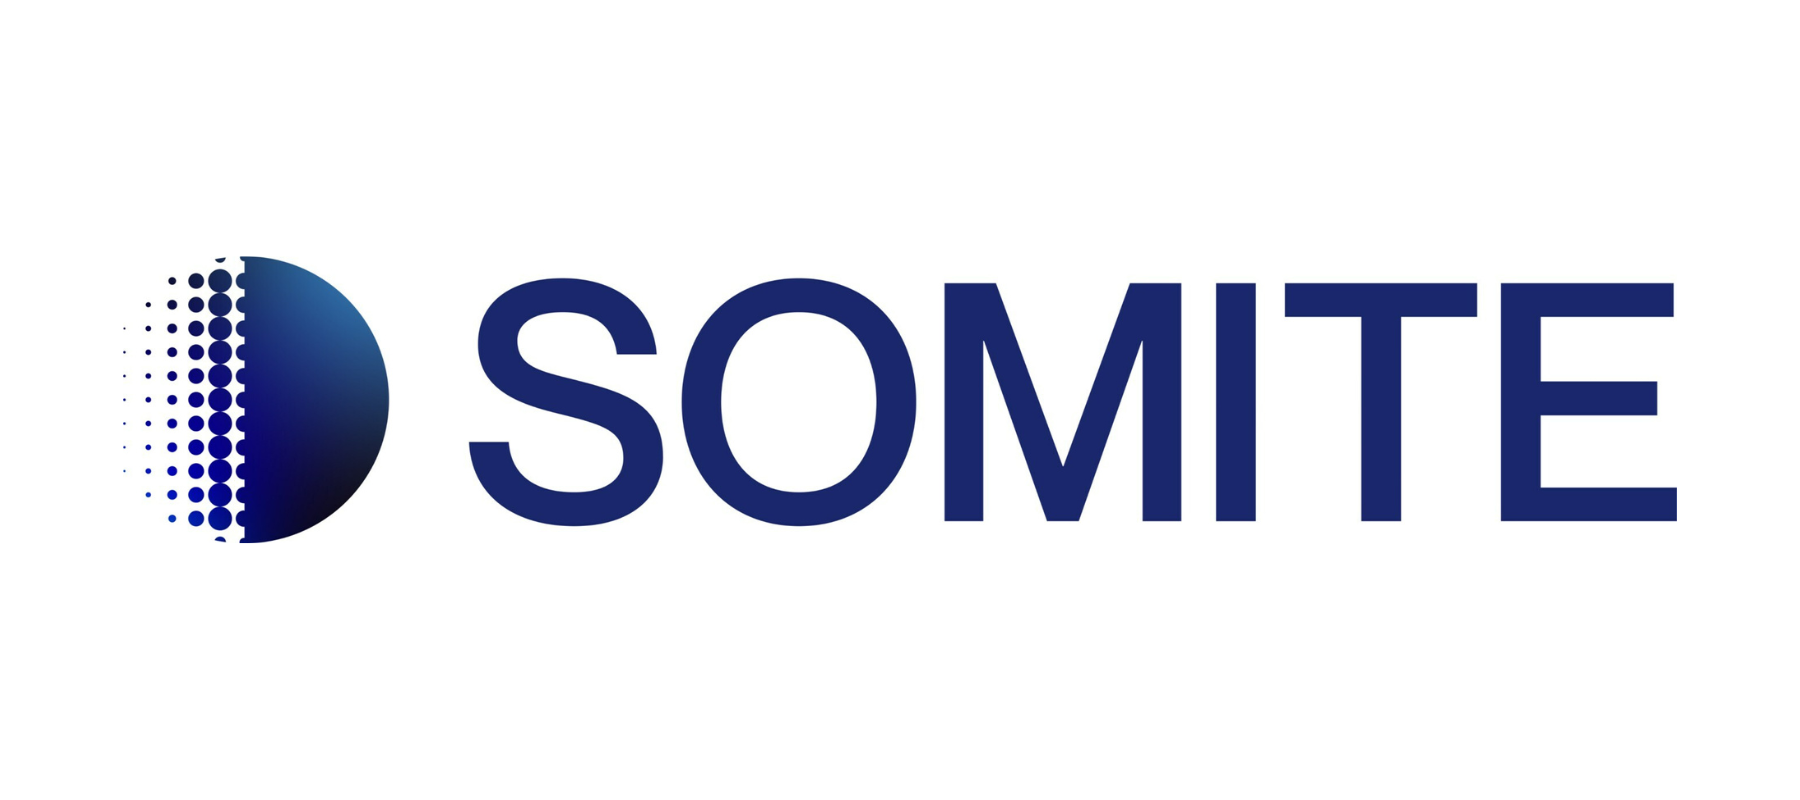 Somite raises $5.3m to incorporate AI in stem cell therapy